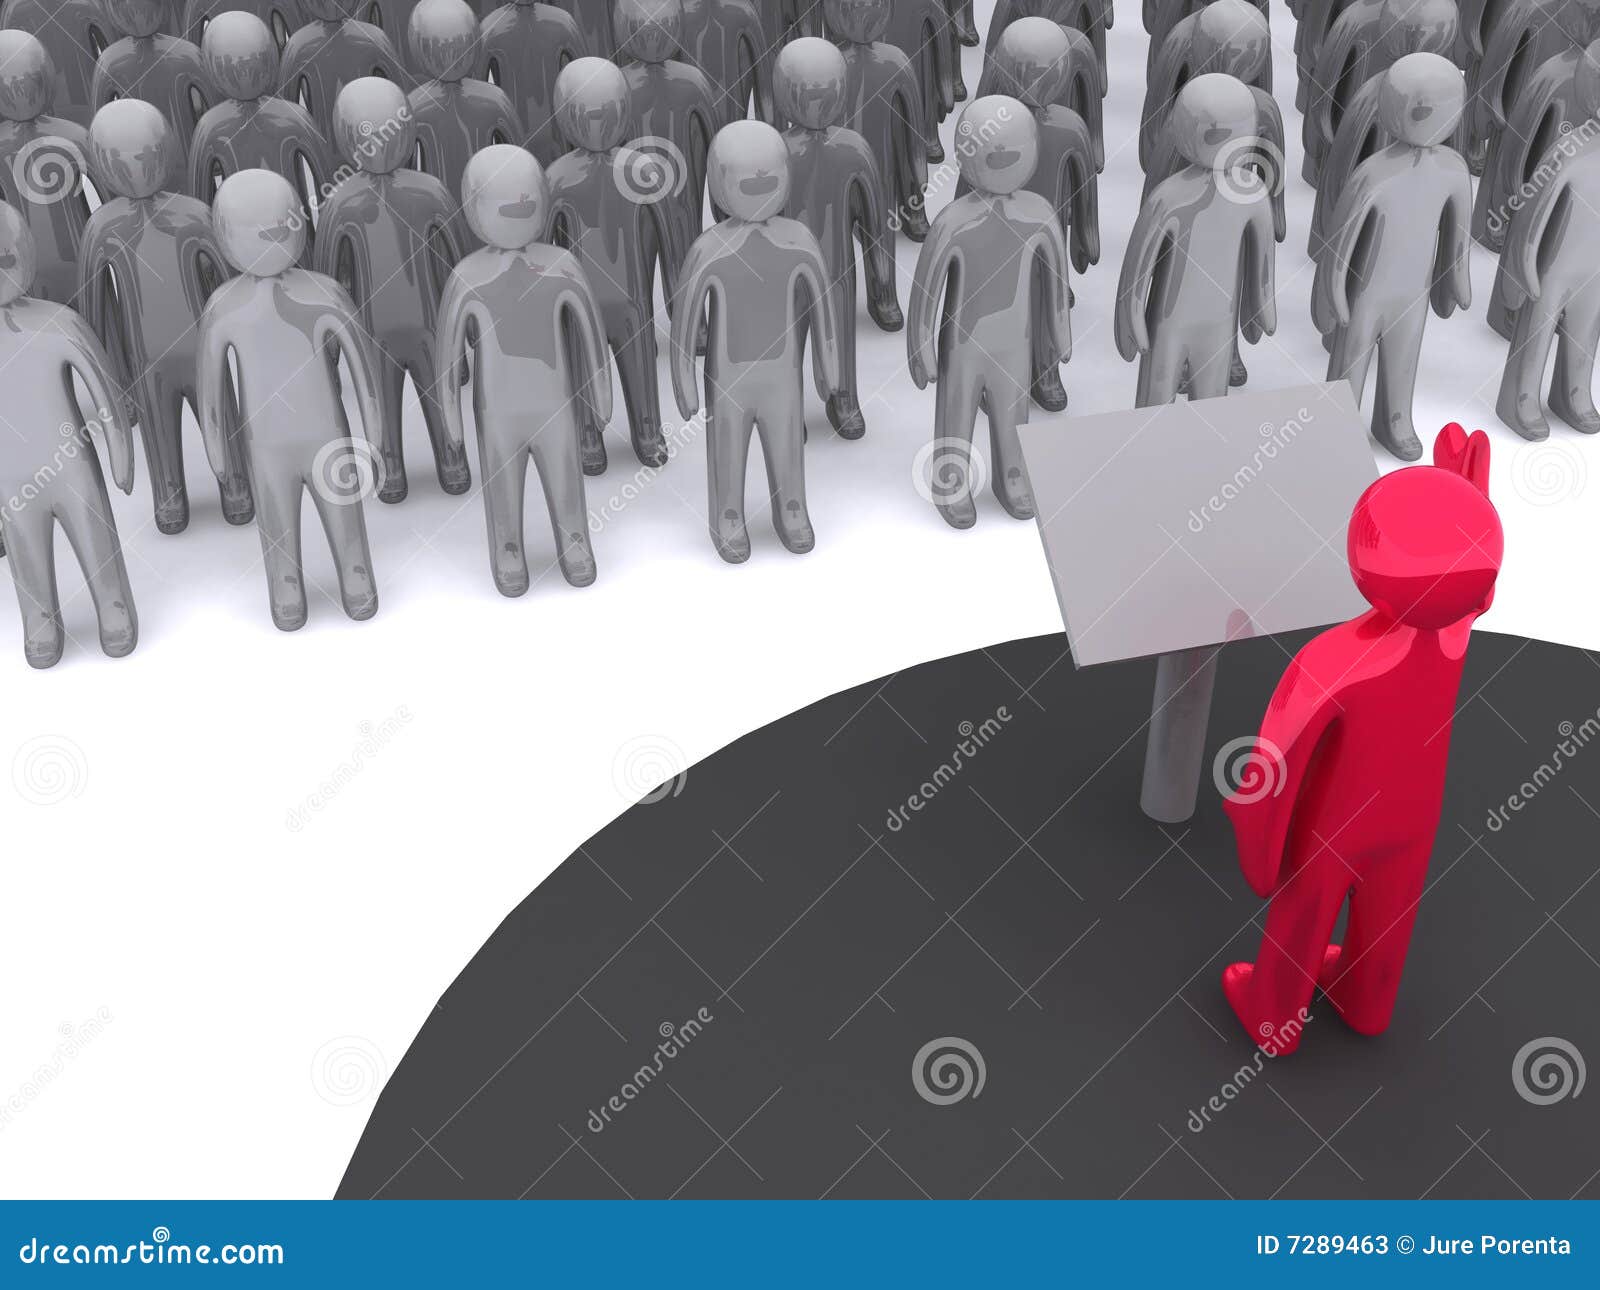 Public speaker. Character standing on platform and speaking. This image is 3d render.